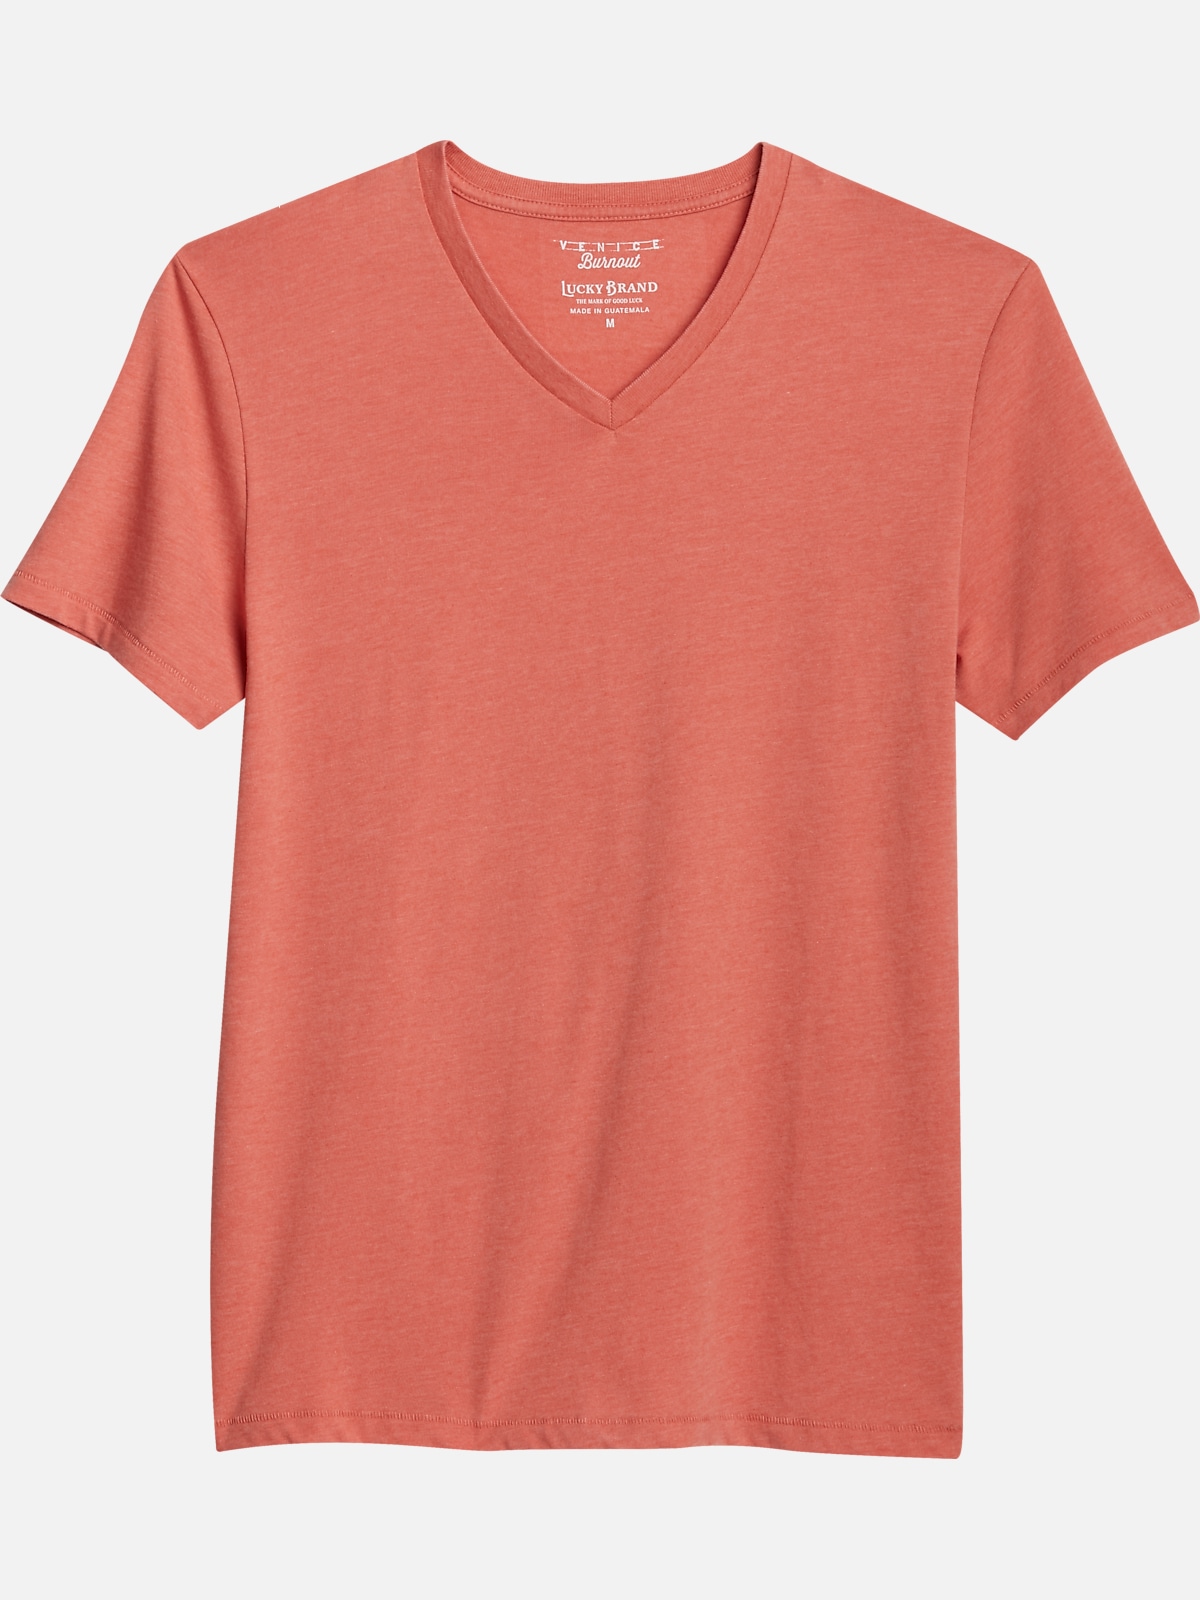 https://image.menswearhouse.com/is/image/TMW/TMW_6NJ2_08_LUCKY_BRAND_T_SHIRTS_ORANGE_MAIN?imPolicy=pdp-zoom-mob